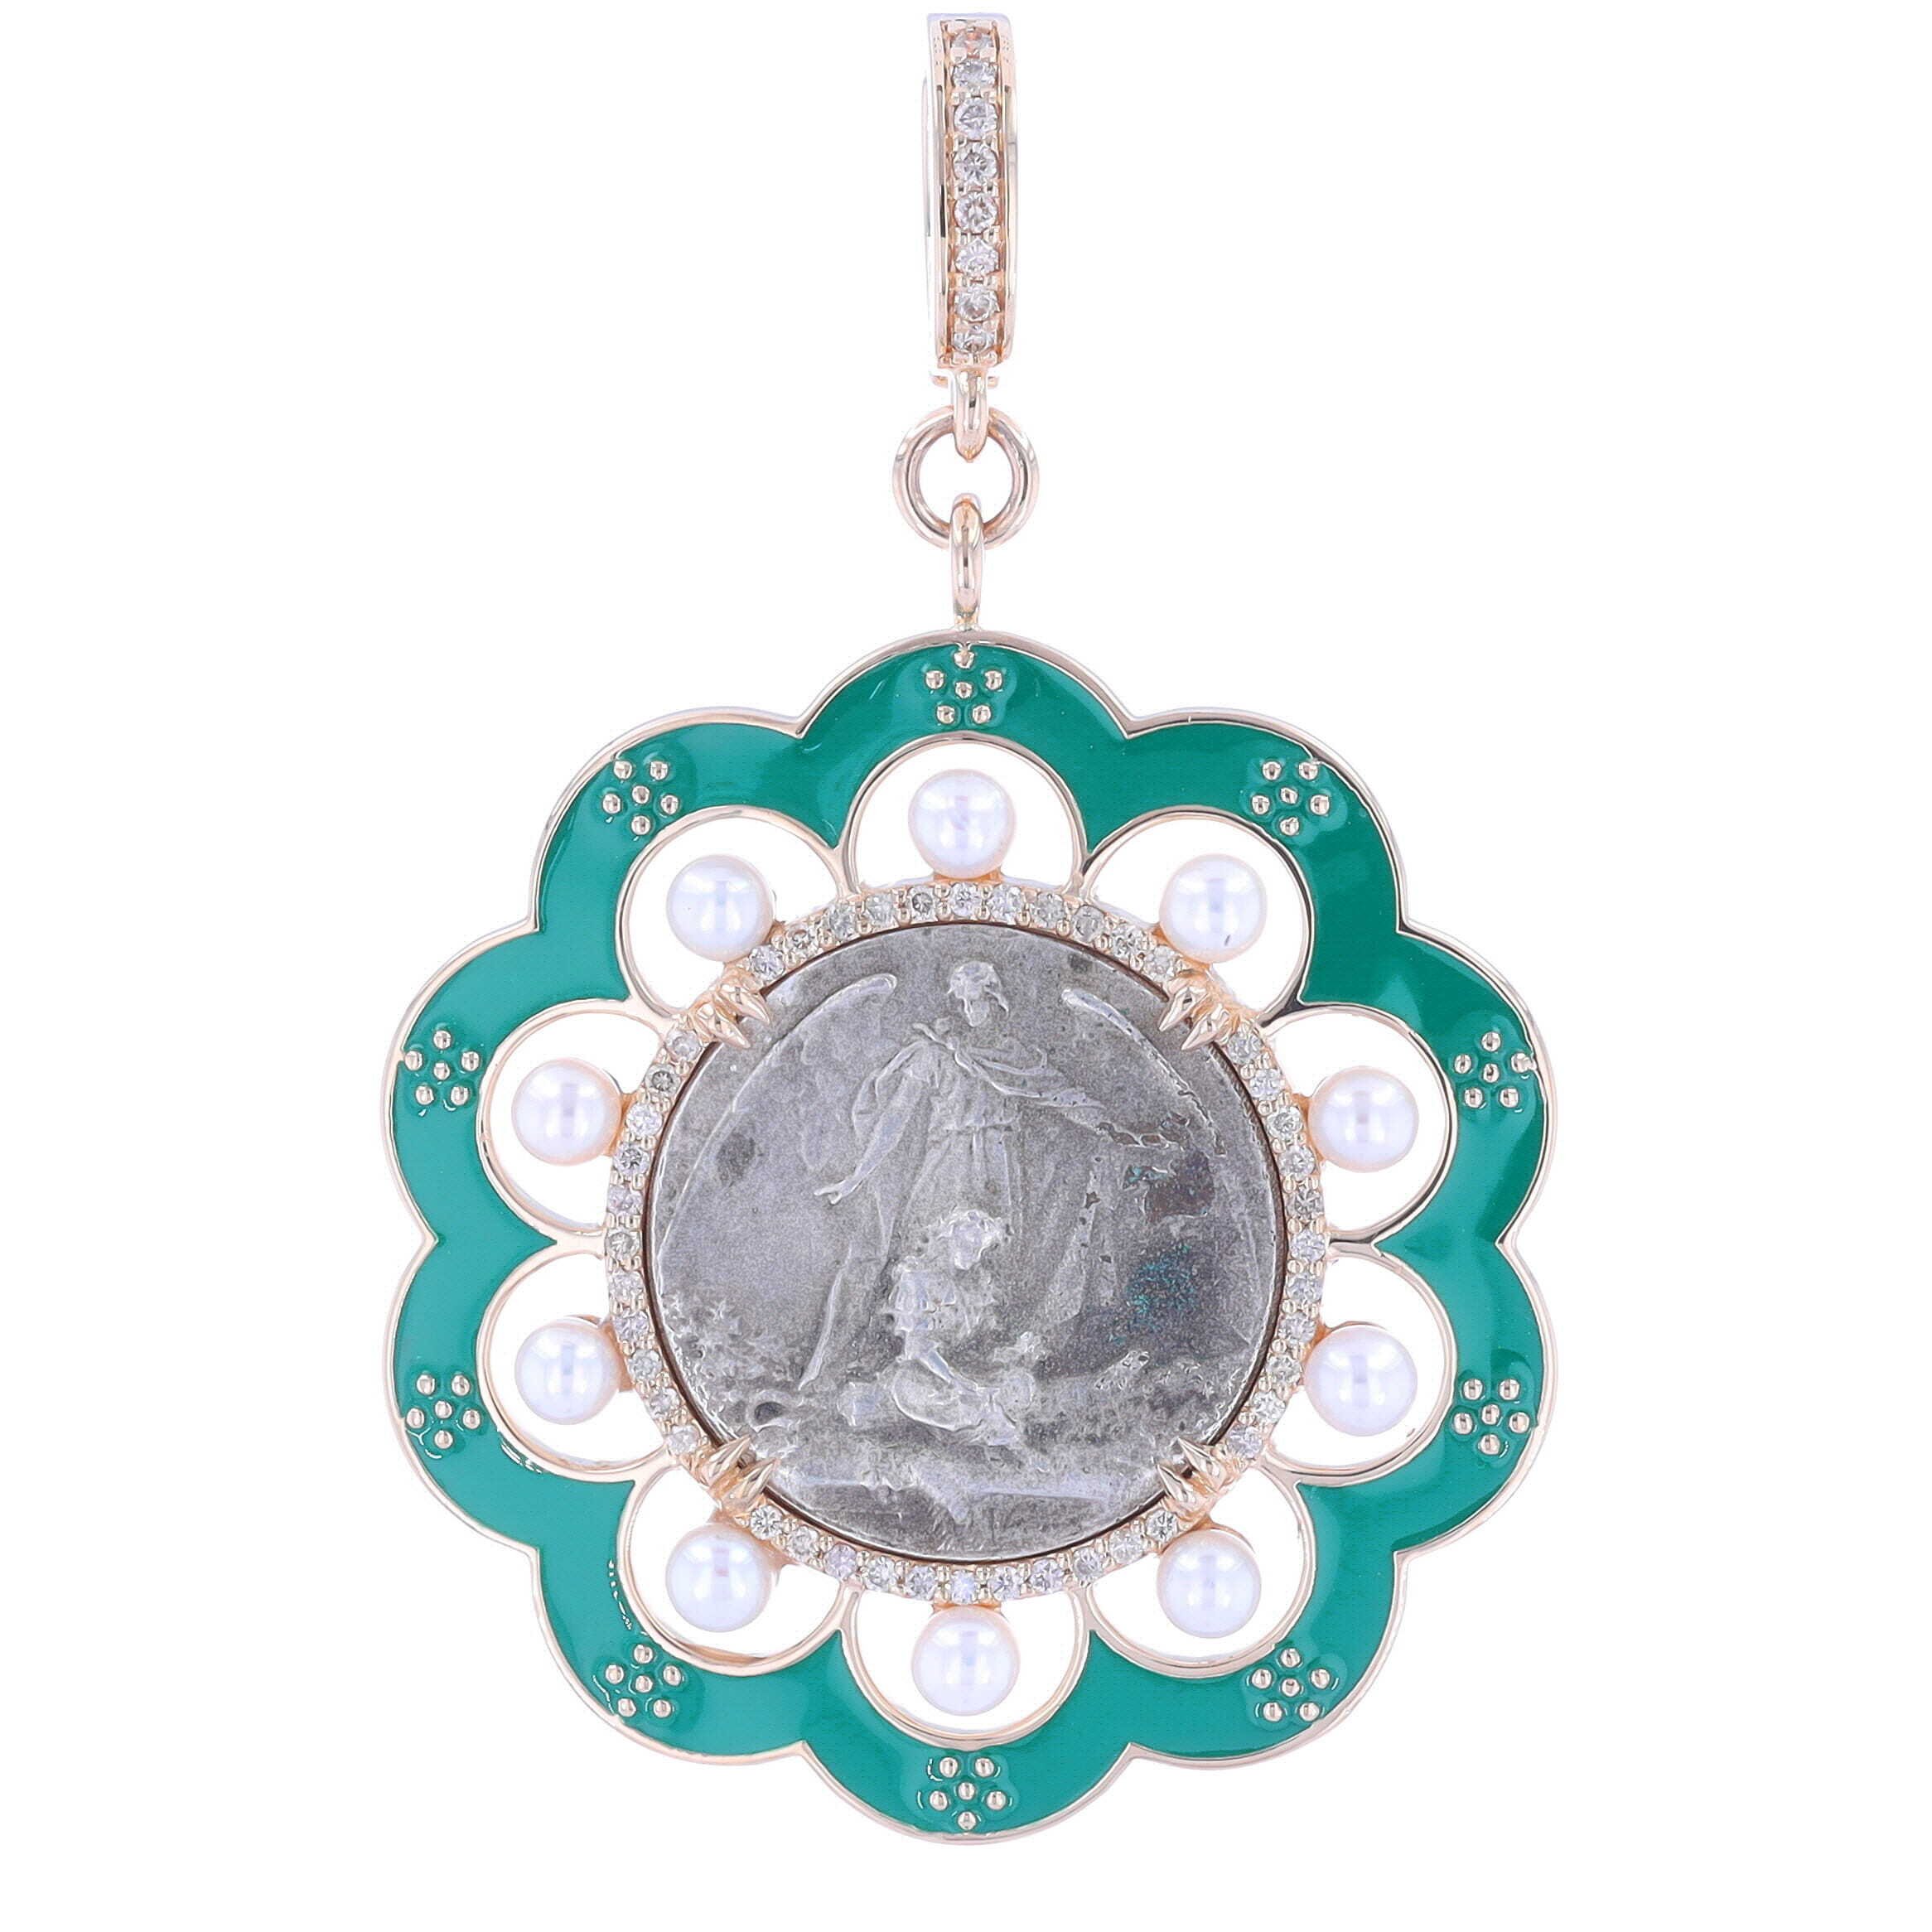 Antique French Sterling Guardian Angel Medal with 14k Yellow Gold Diamond, Green Enamel & Pearl Bezel